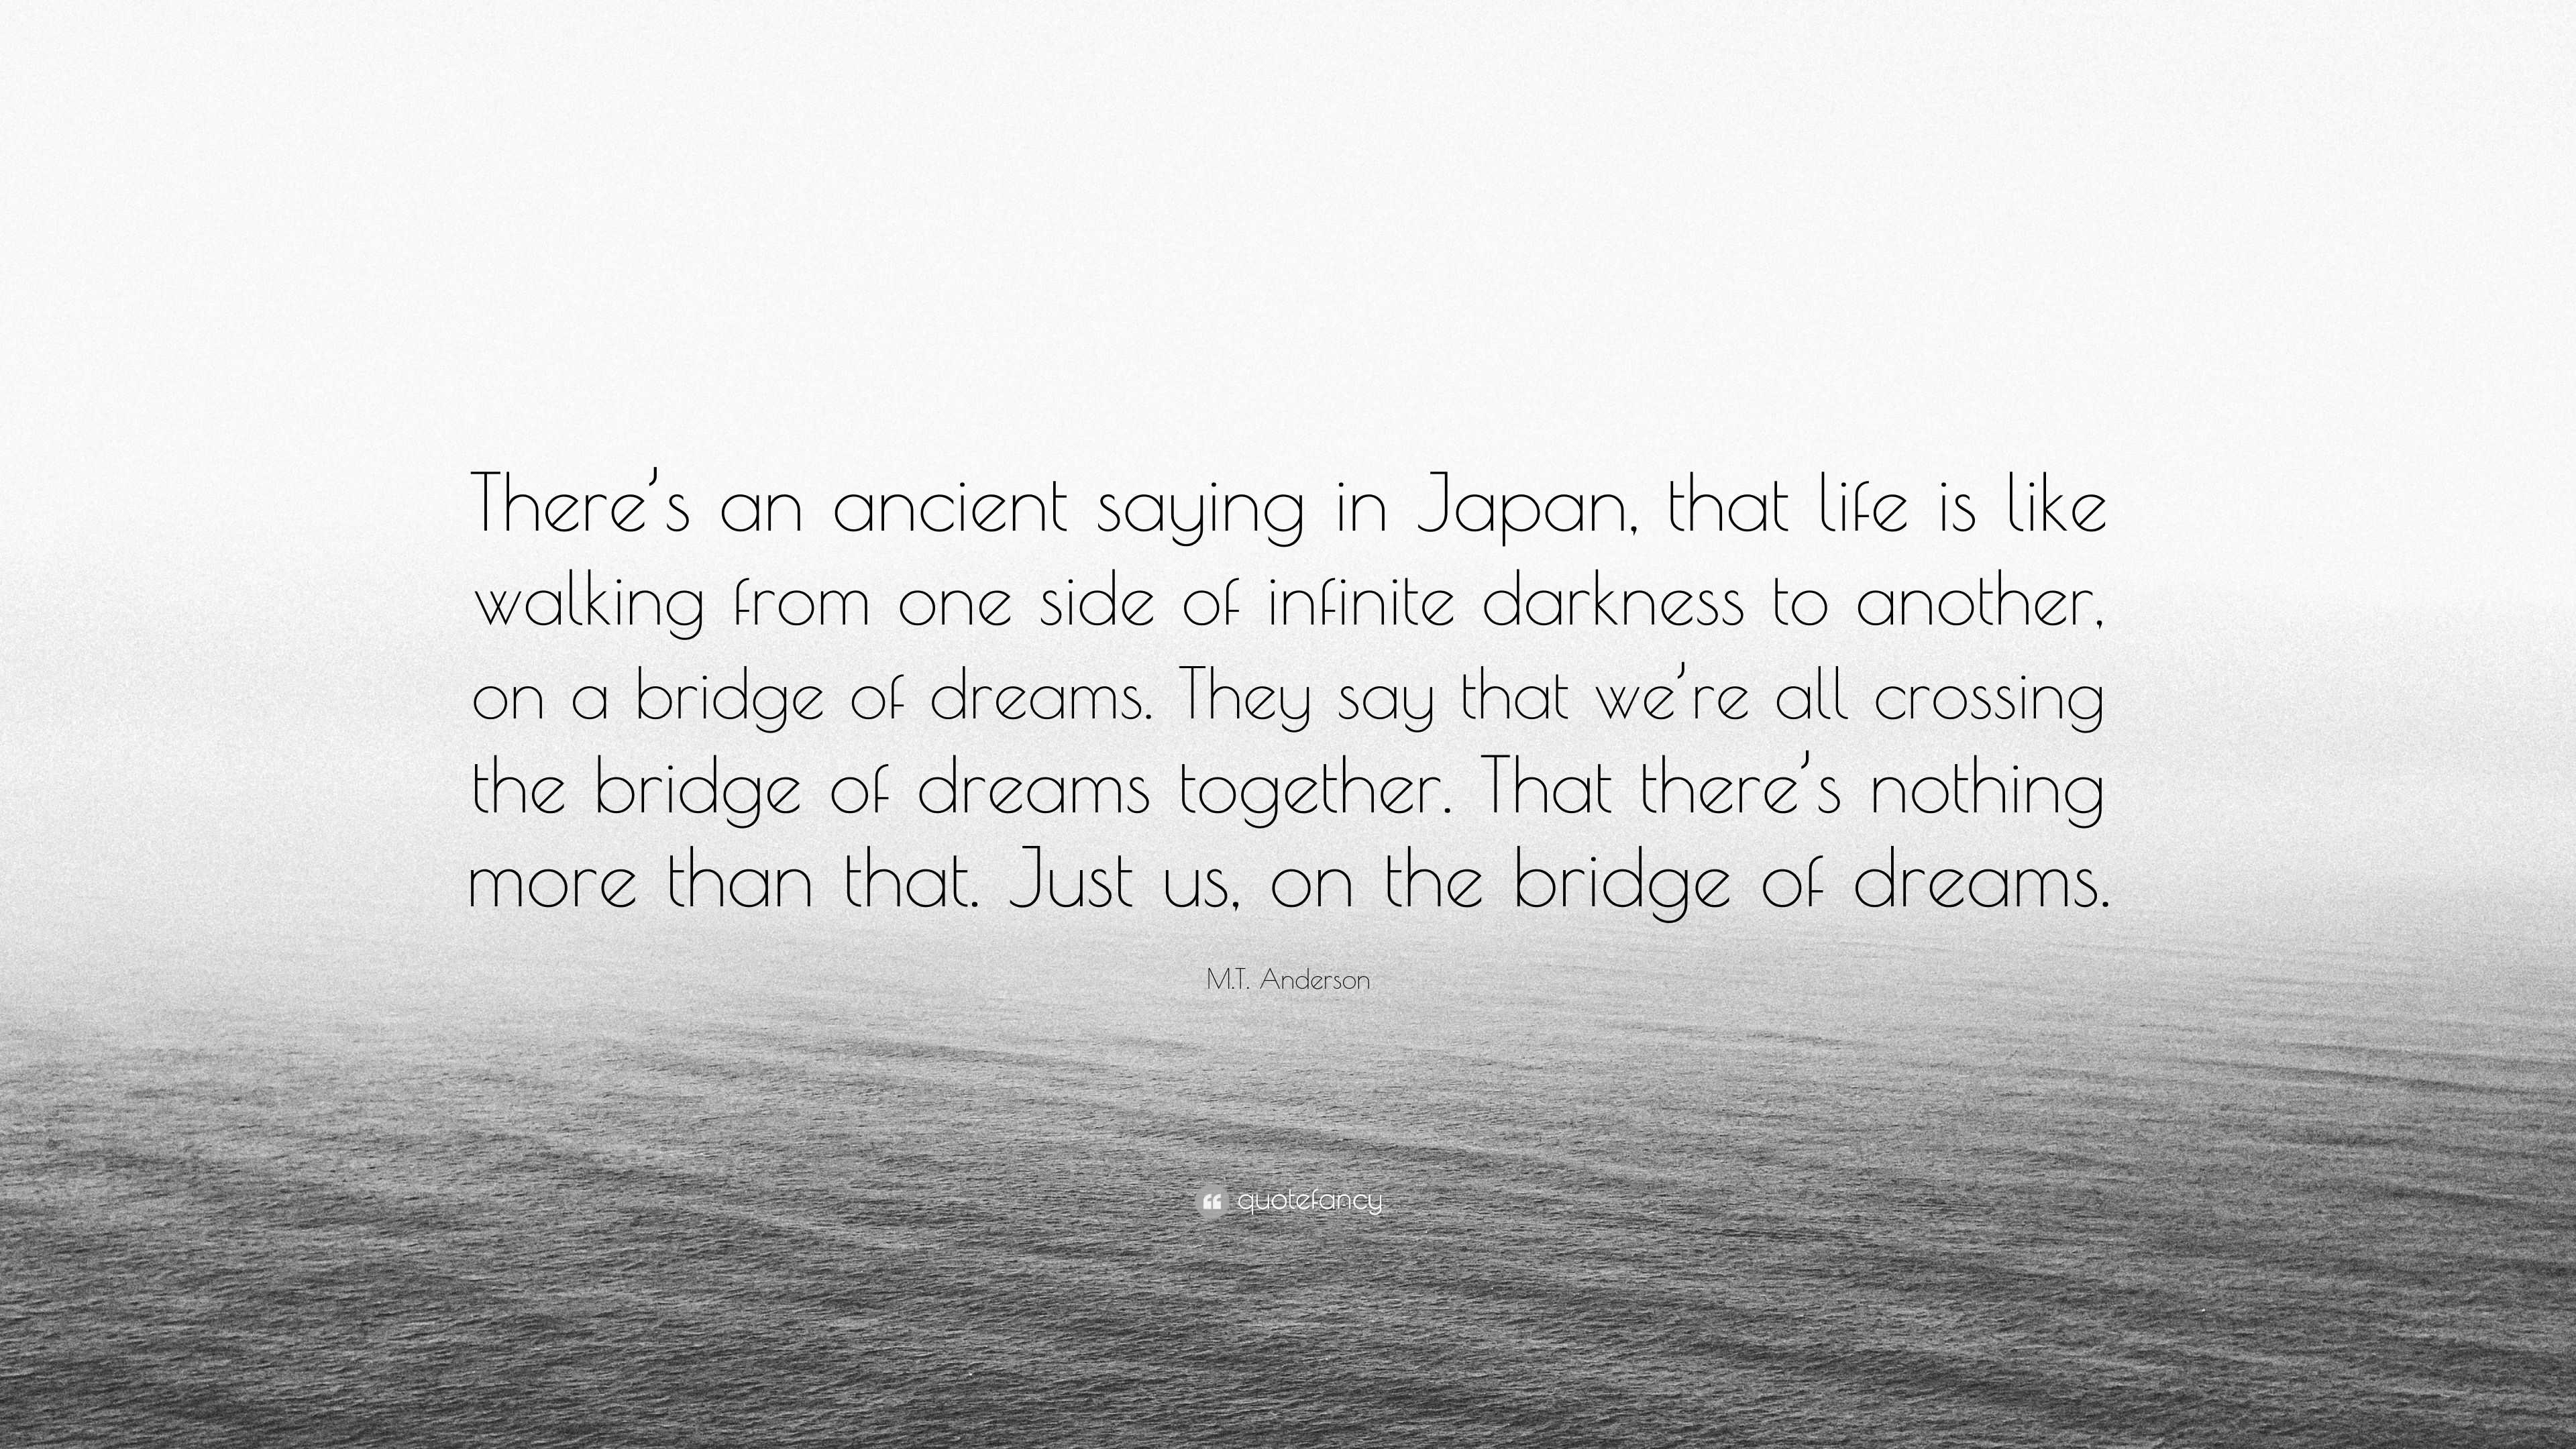 M T Anderson Quote “There s an ancient saying in Japan that life is like